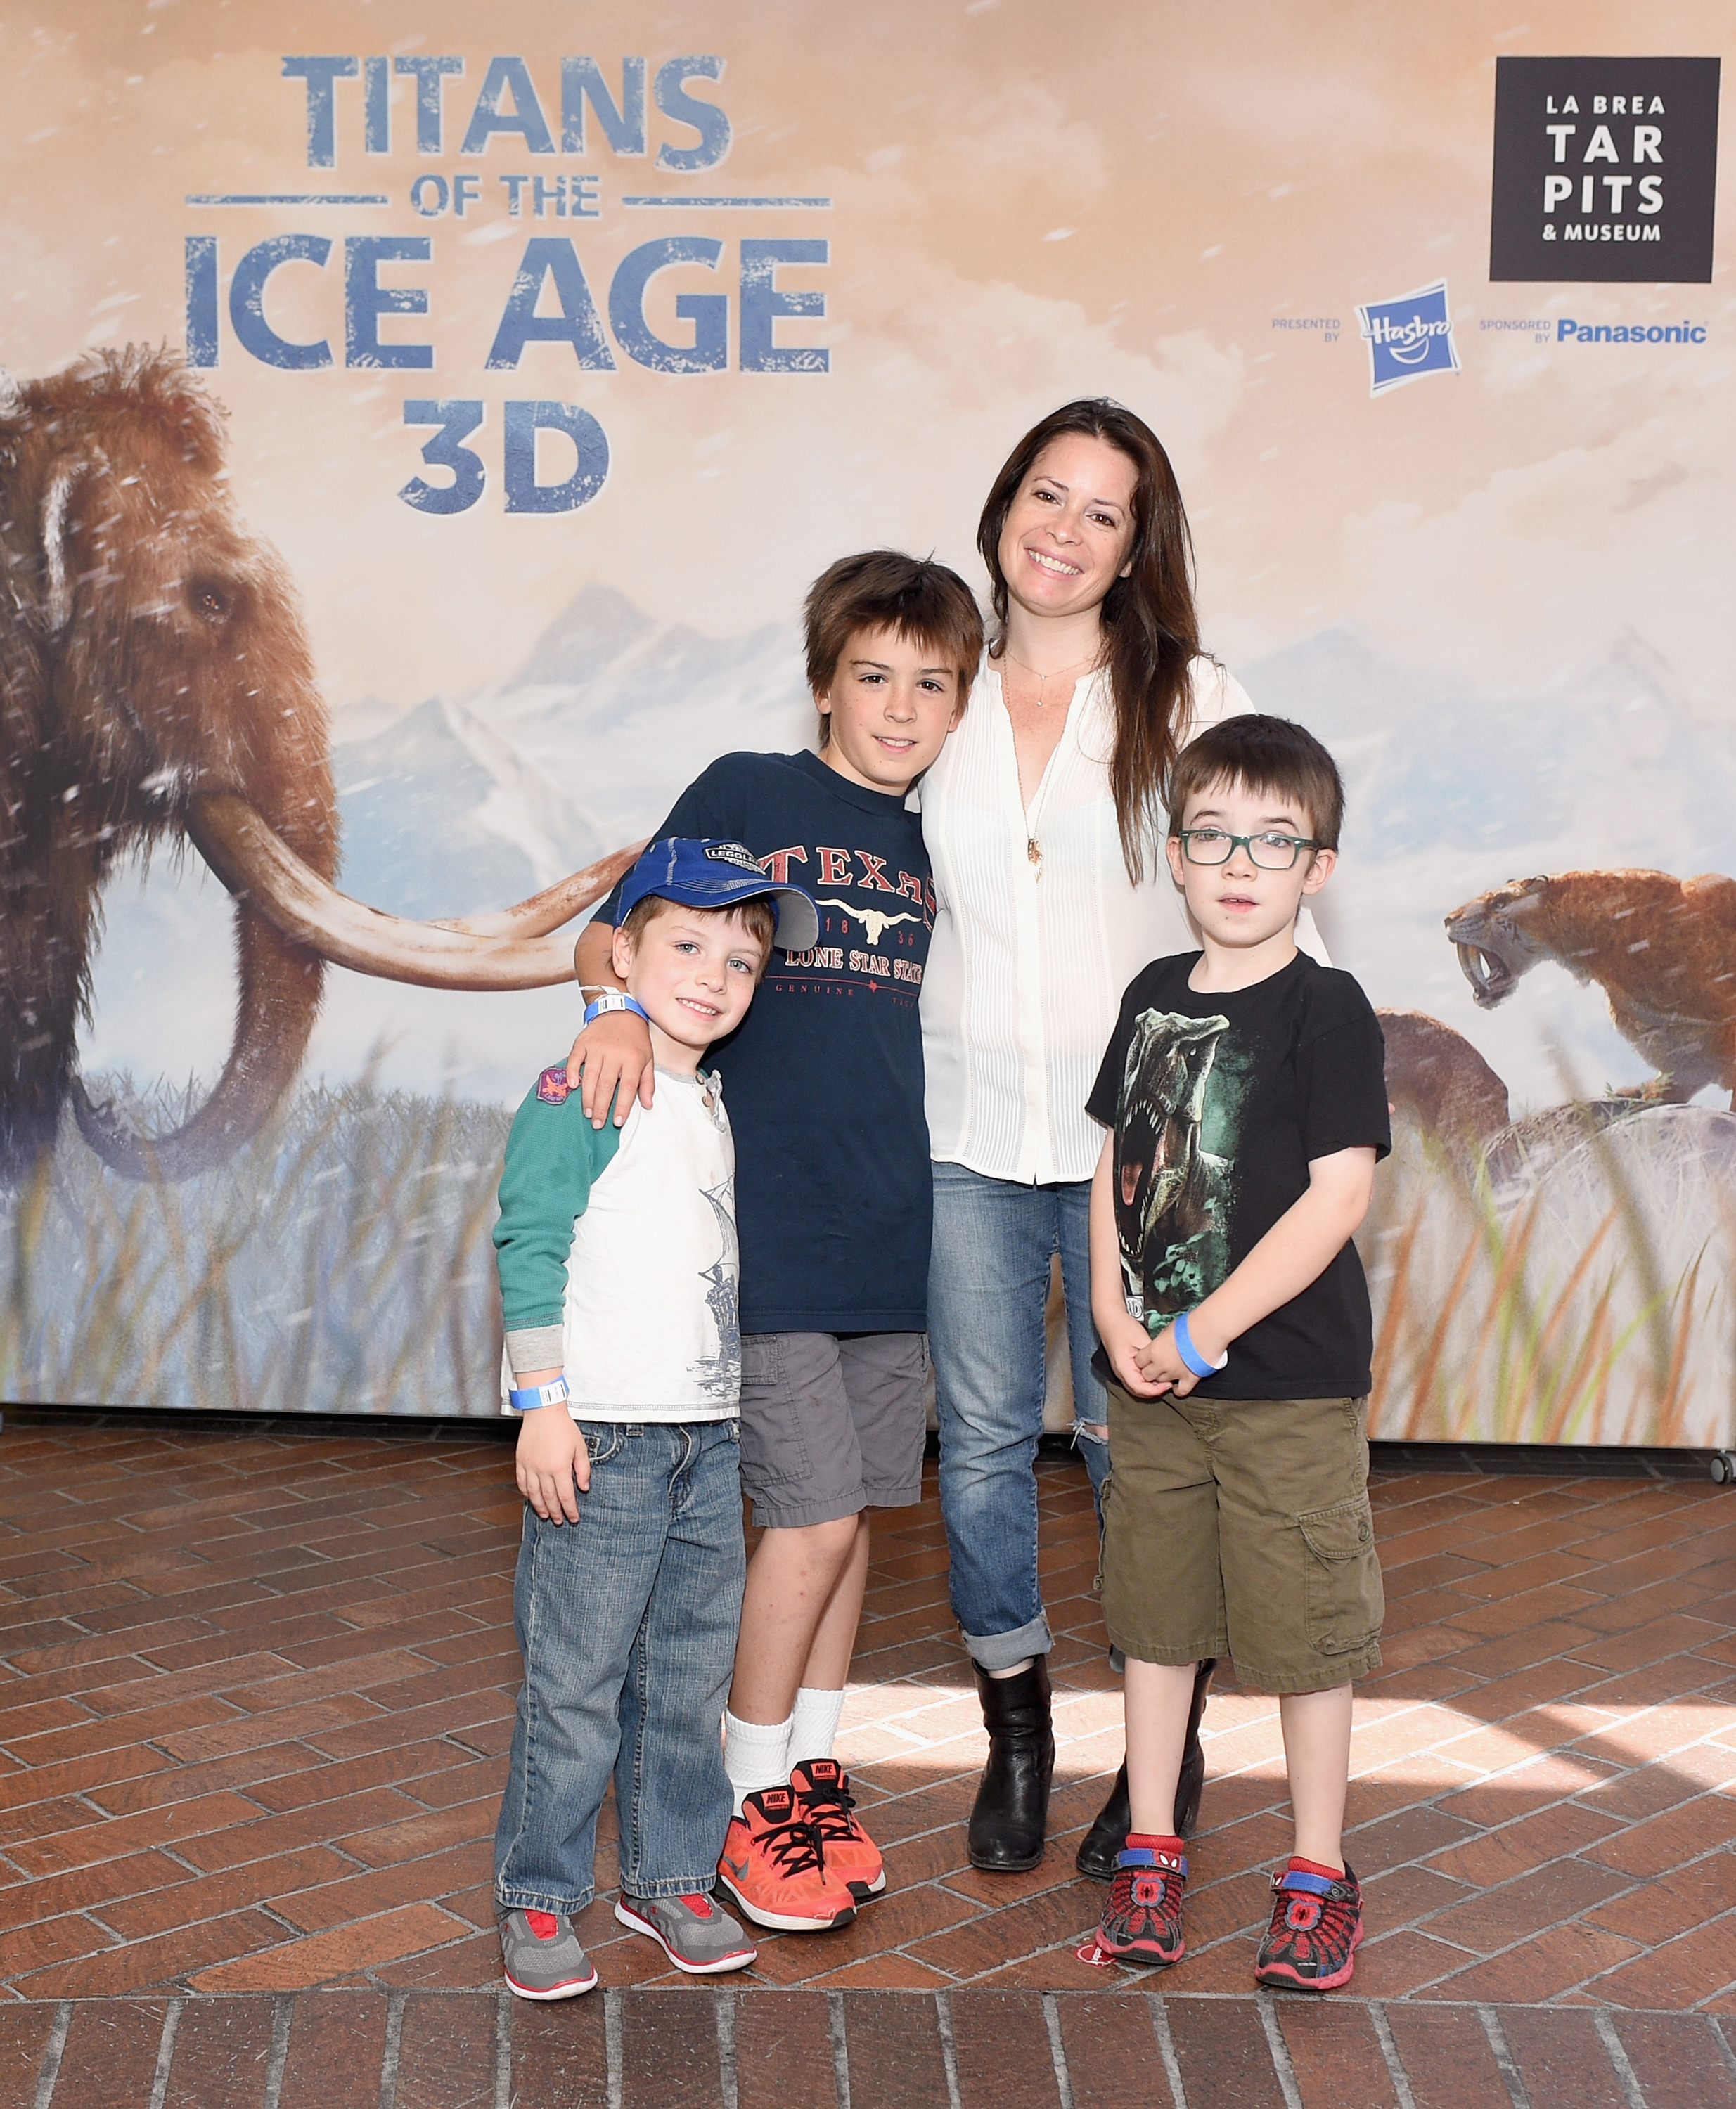 Holly Marie Combs and her sons, Kelley, Finley, and Riley Donoho, at the "Titans of the Ice Age" premiere in Los Angeles, California, on June 20, 2015 | Source: Getty Images